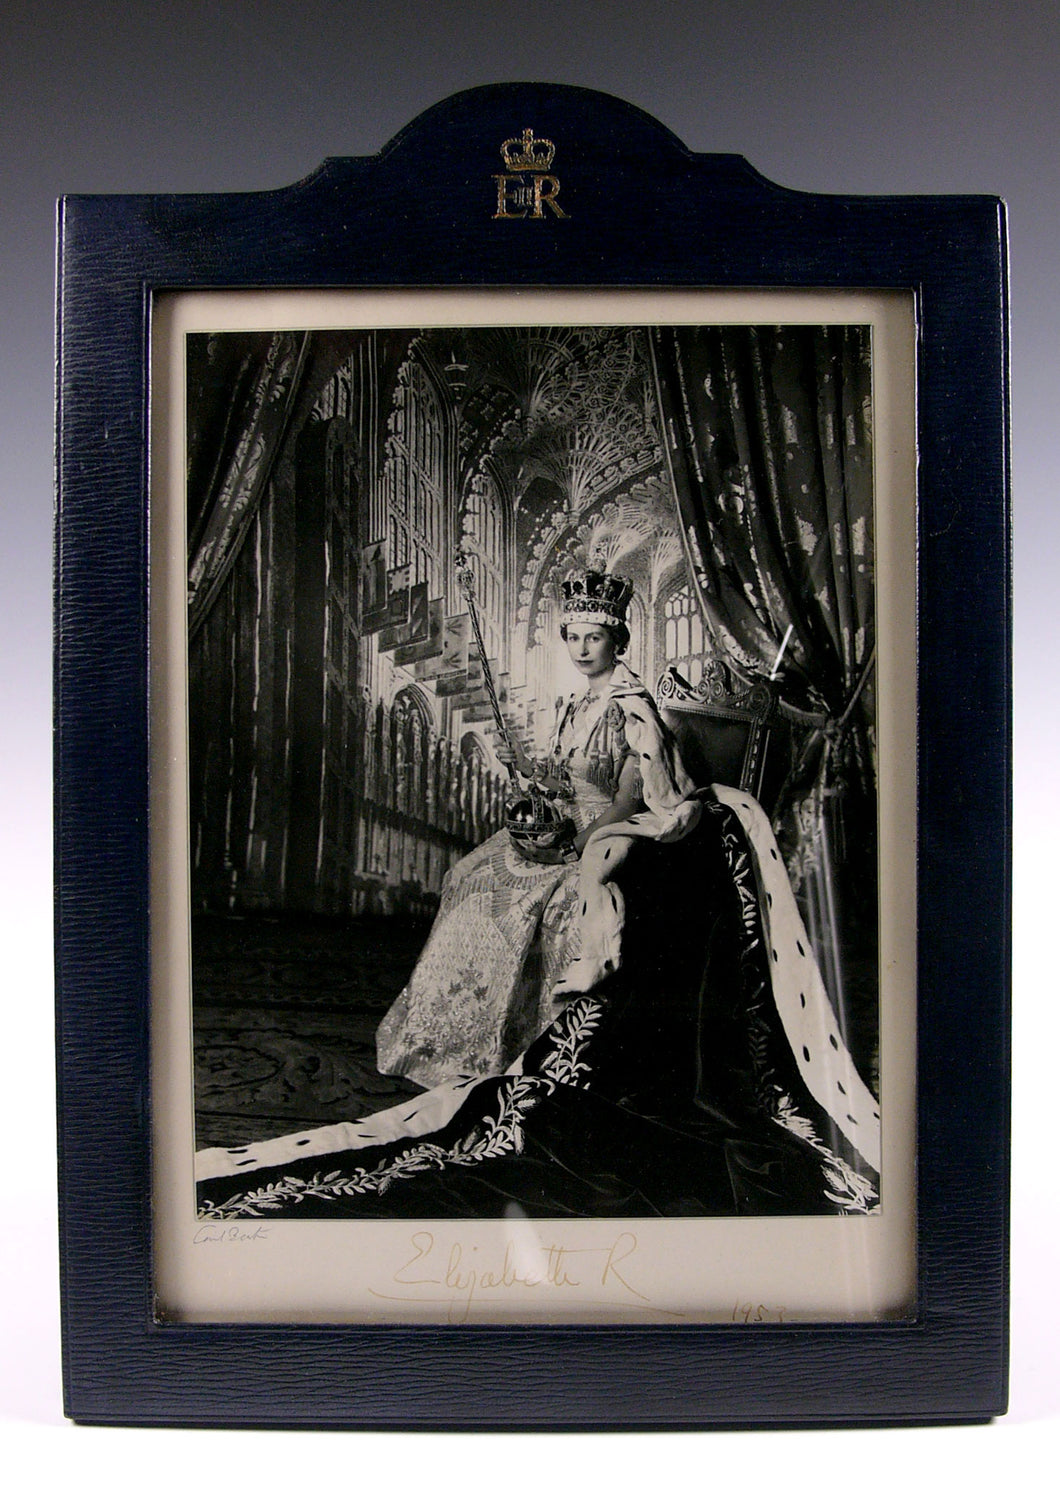 A Royal Presentation Coronation Portrait of H.M. Queen Elizabeth II by Cecil Beaton, signed and dated 1953